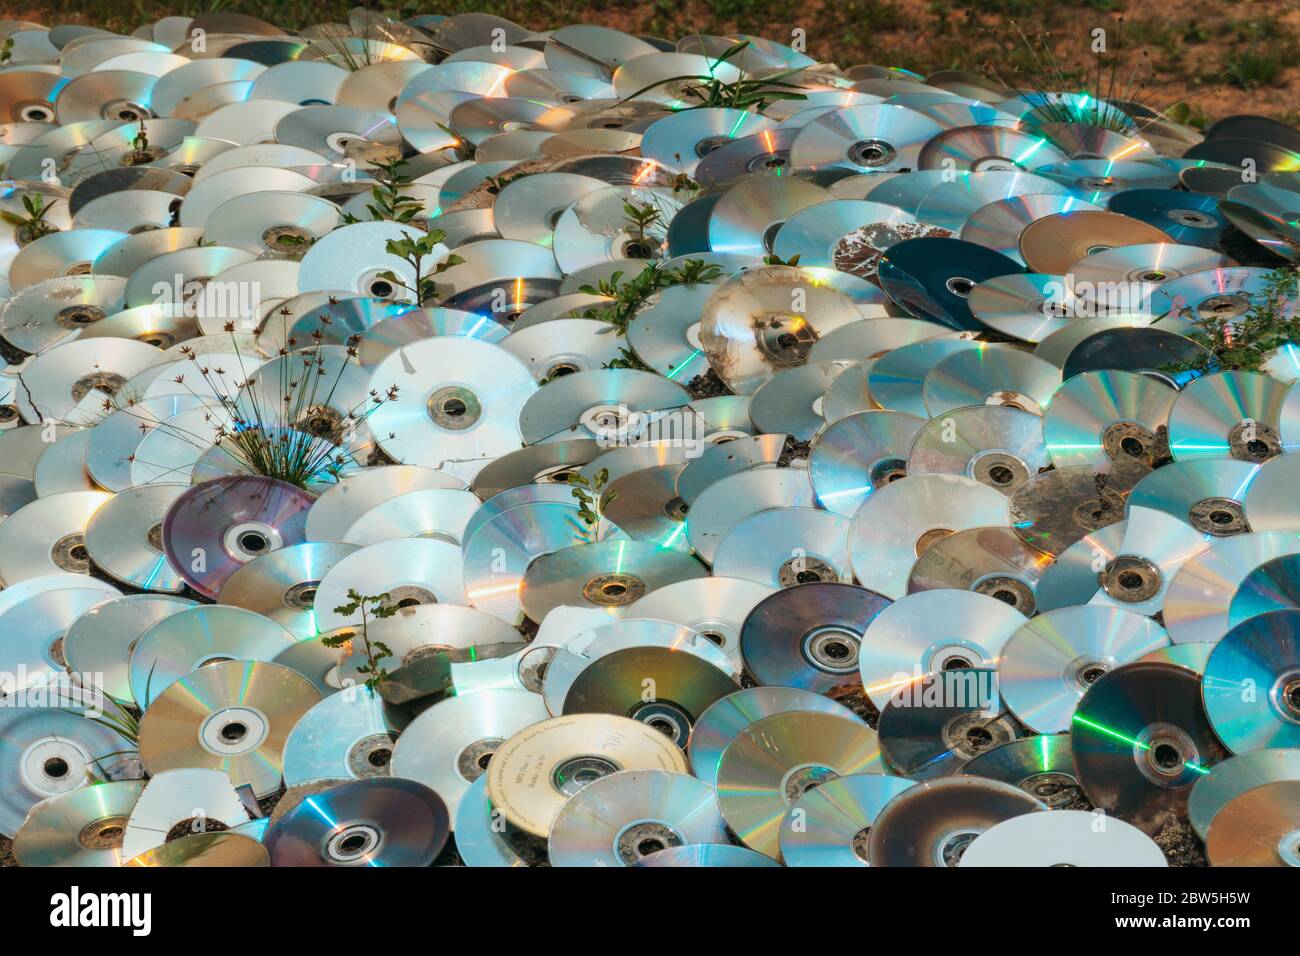 A collection of compact discs discarded in soil, shiny side up Stock Photo